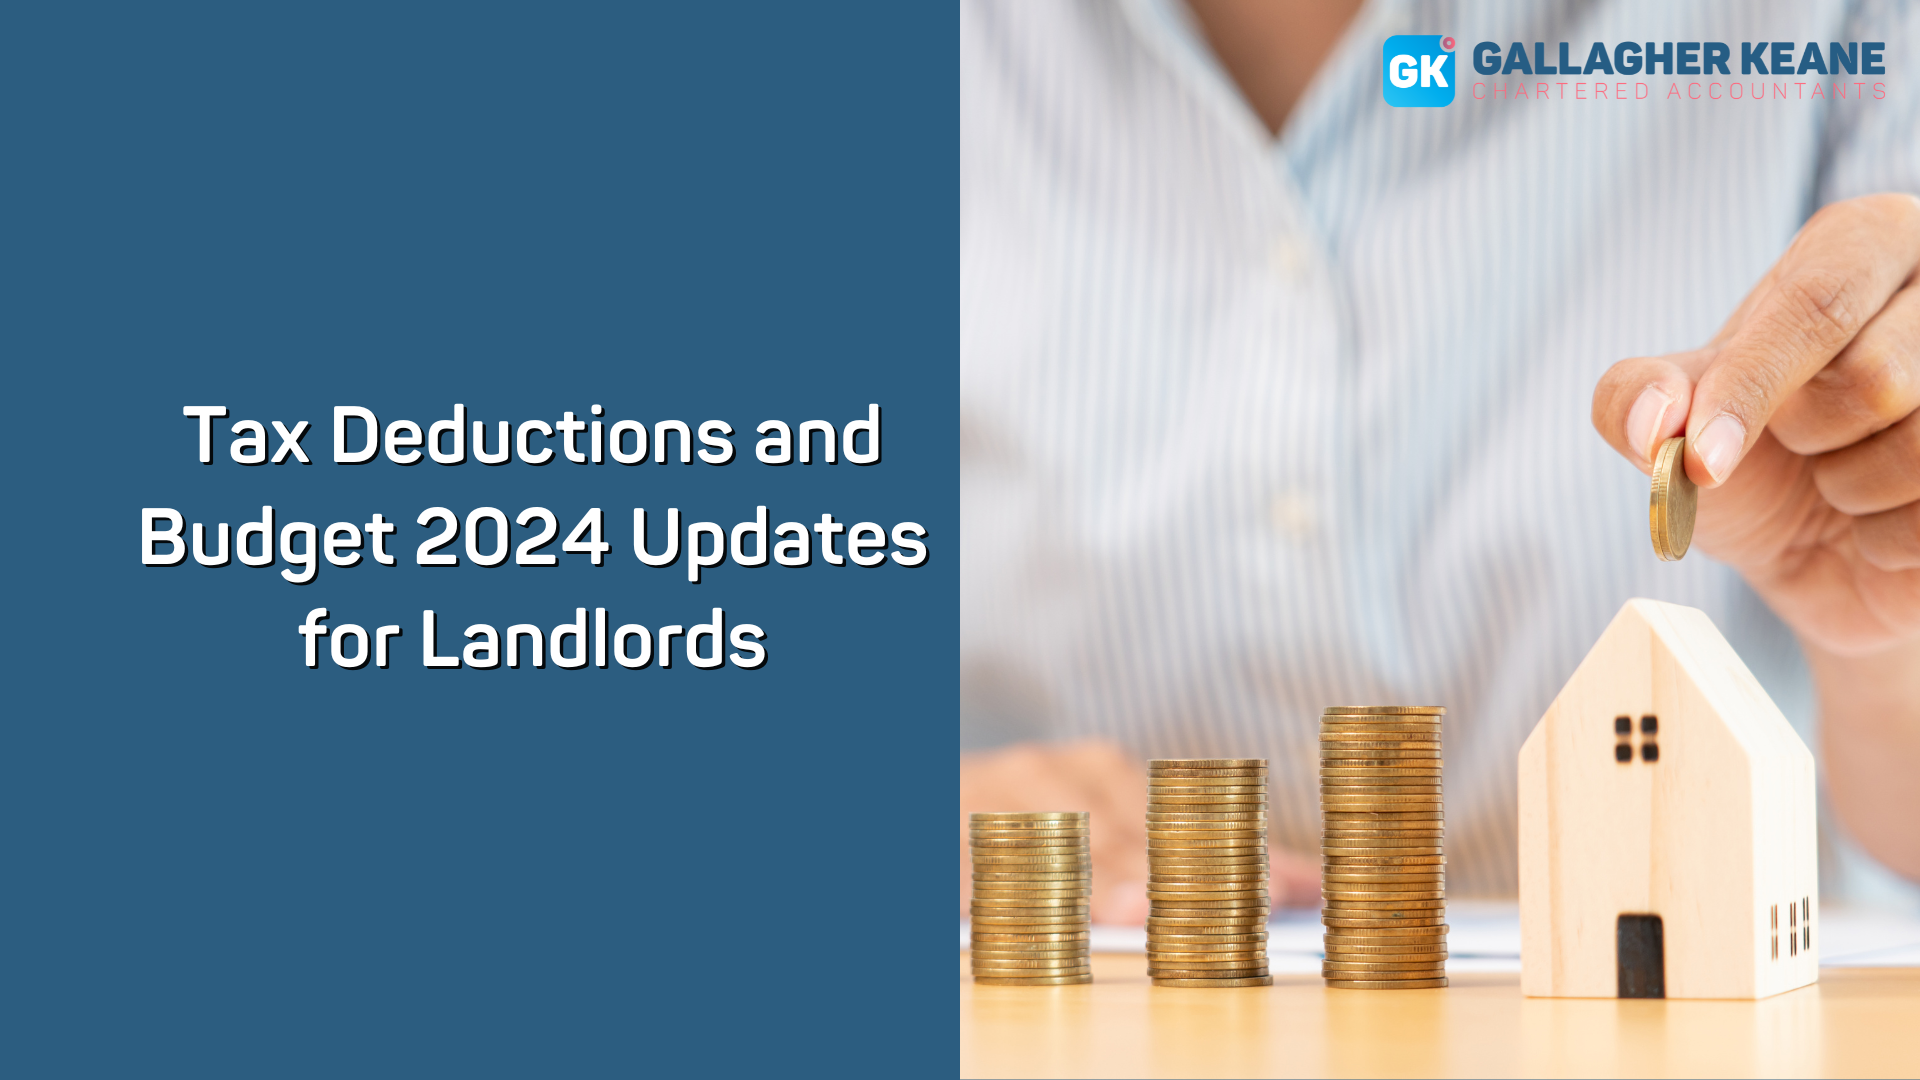 Tax Deductions and Budget 2024 Updates for Landlords